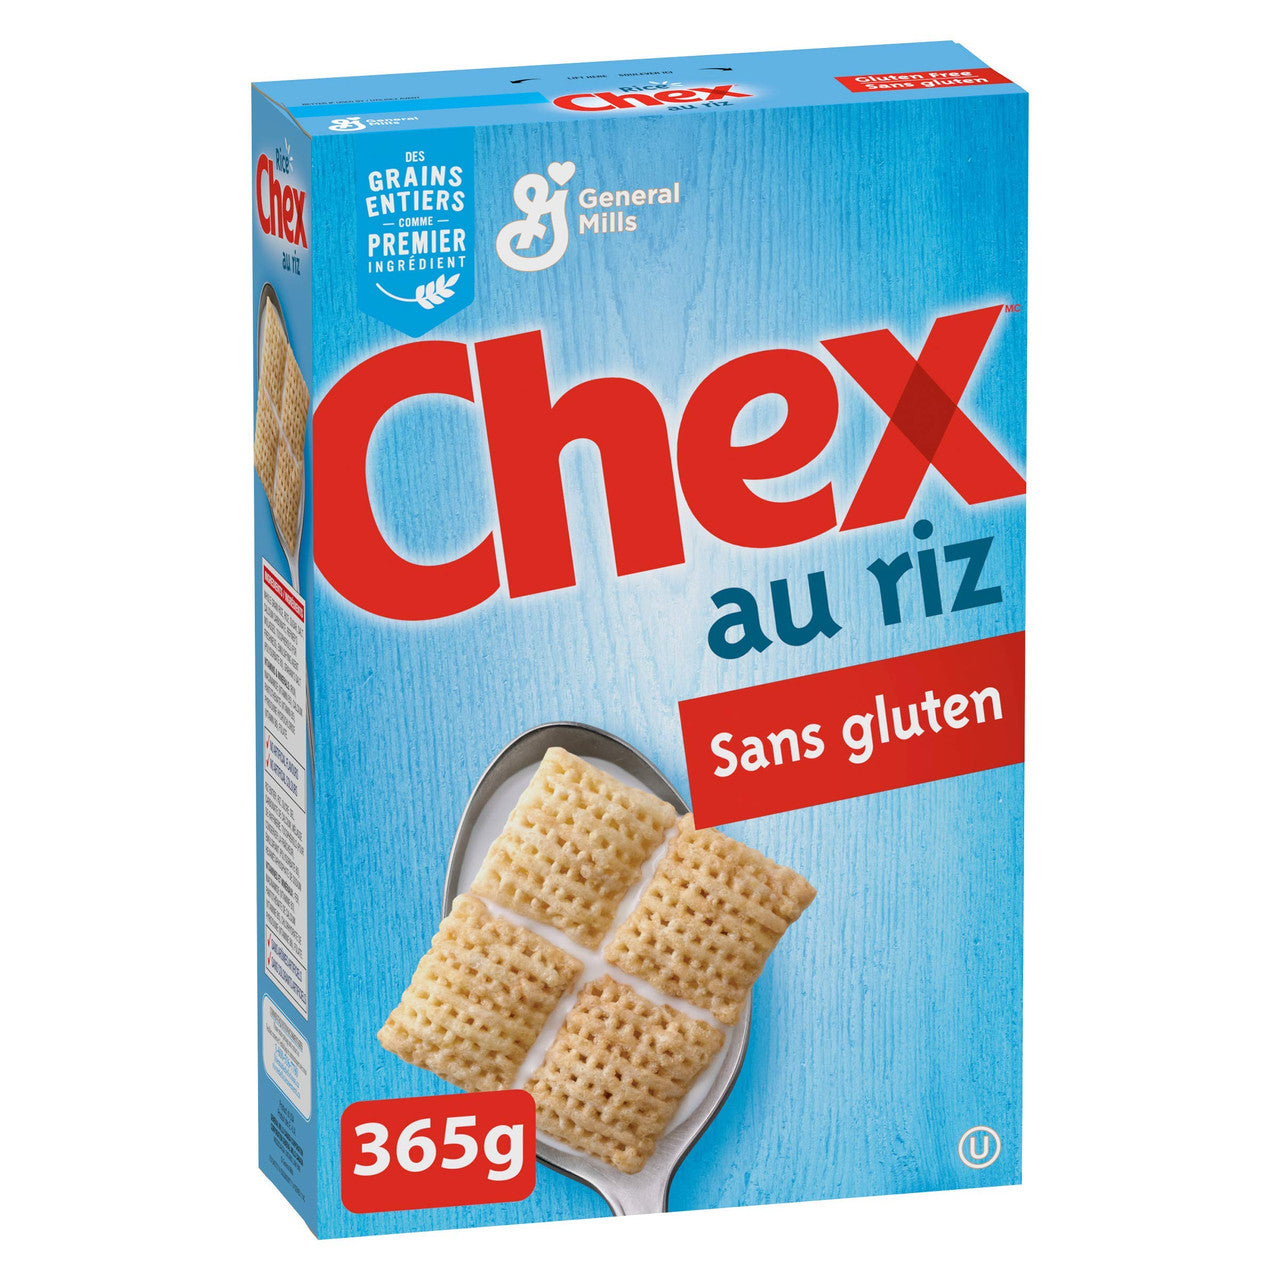 Chex Gluten Free Rice Cereal, 365g/12.8oz, (Imported from Canada)